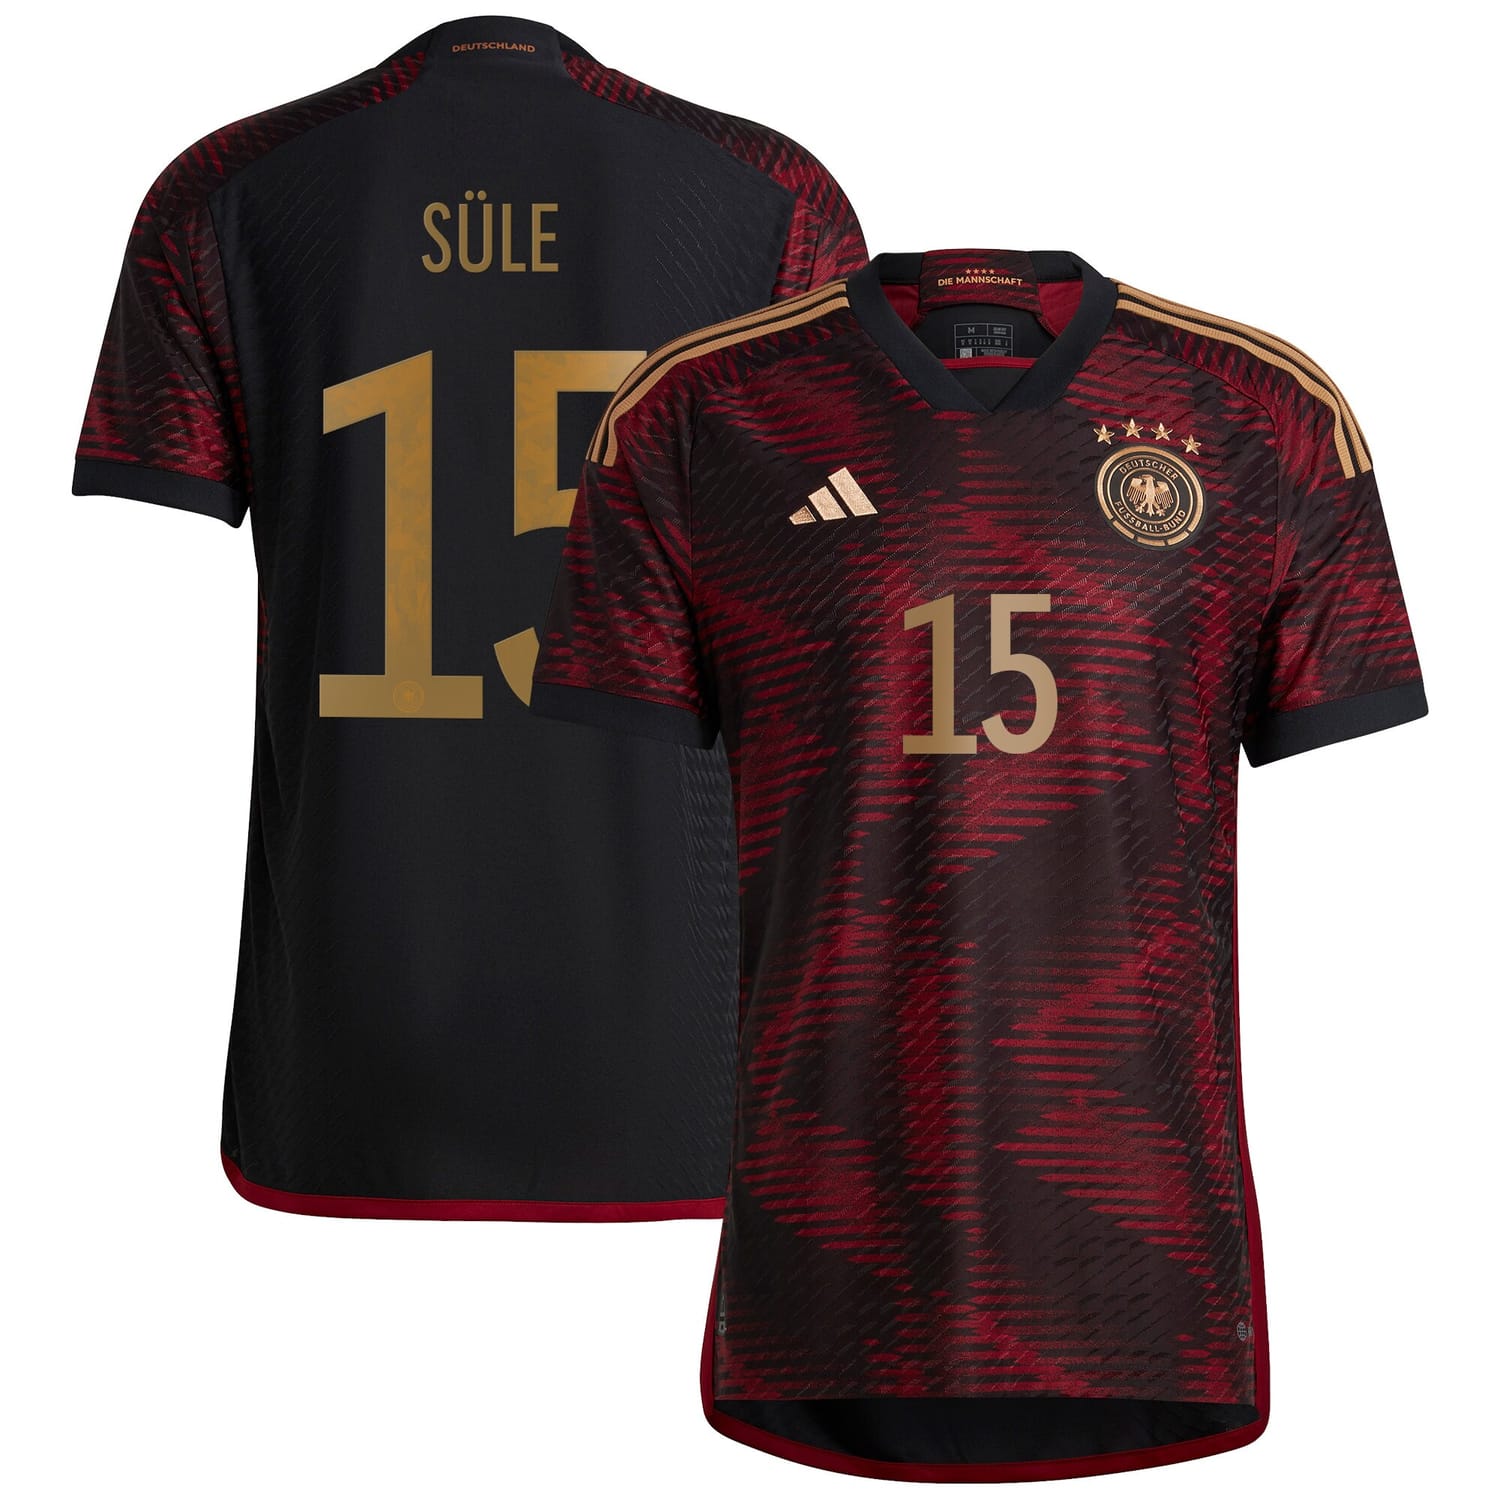 Germany National Team Away Authentic Jersey Shirt player Niklas Süle 15 printing for Men